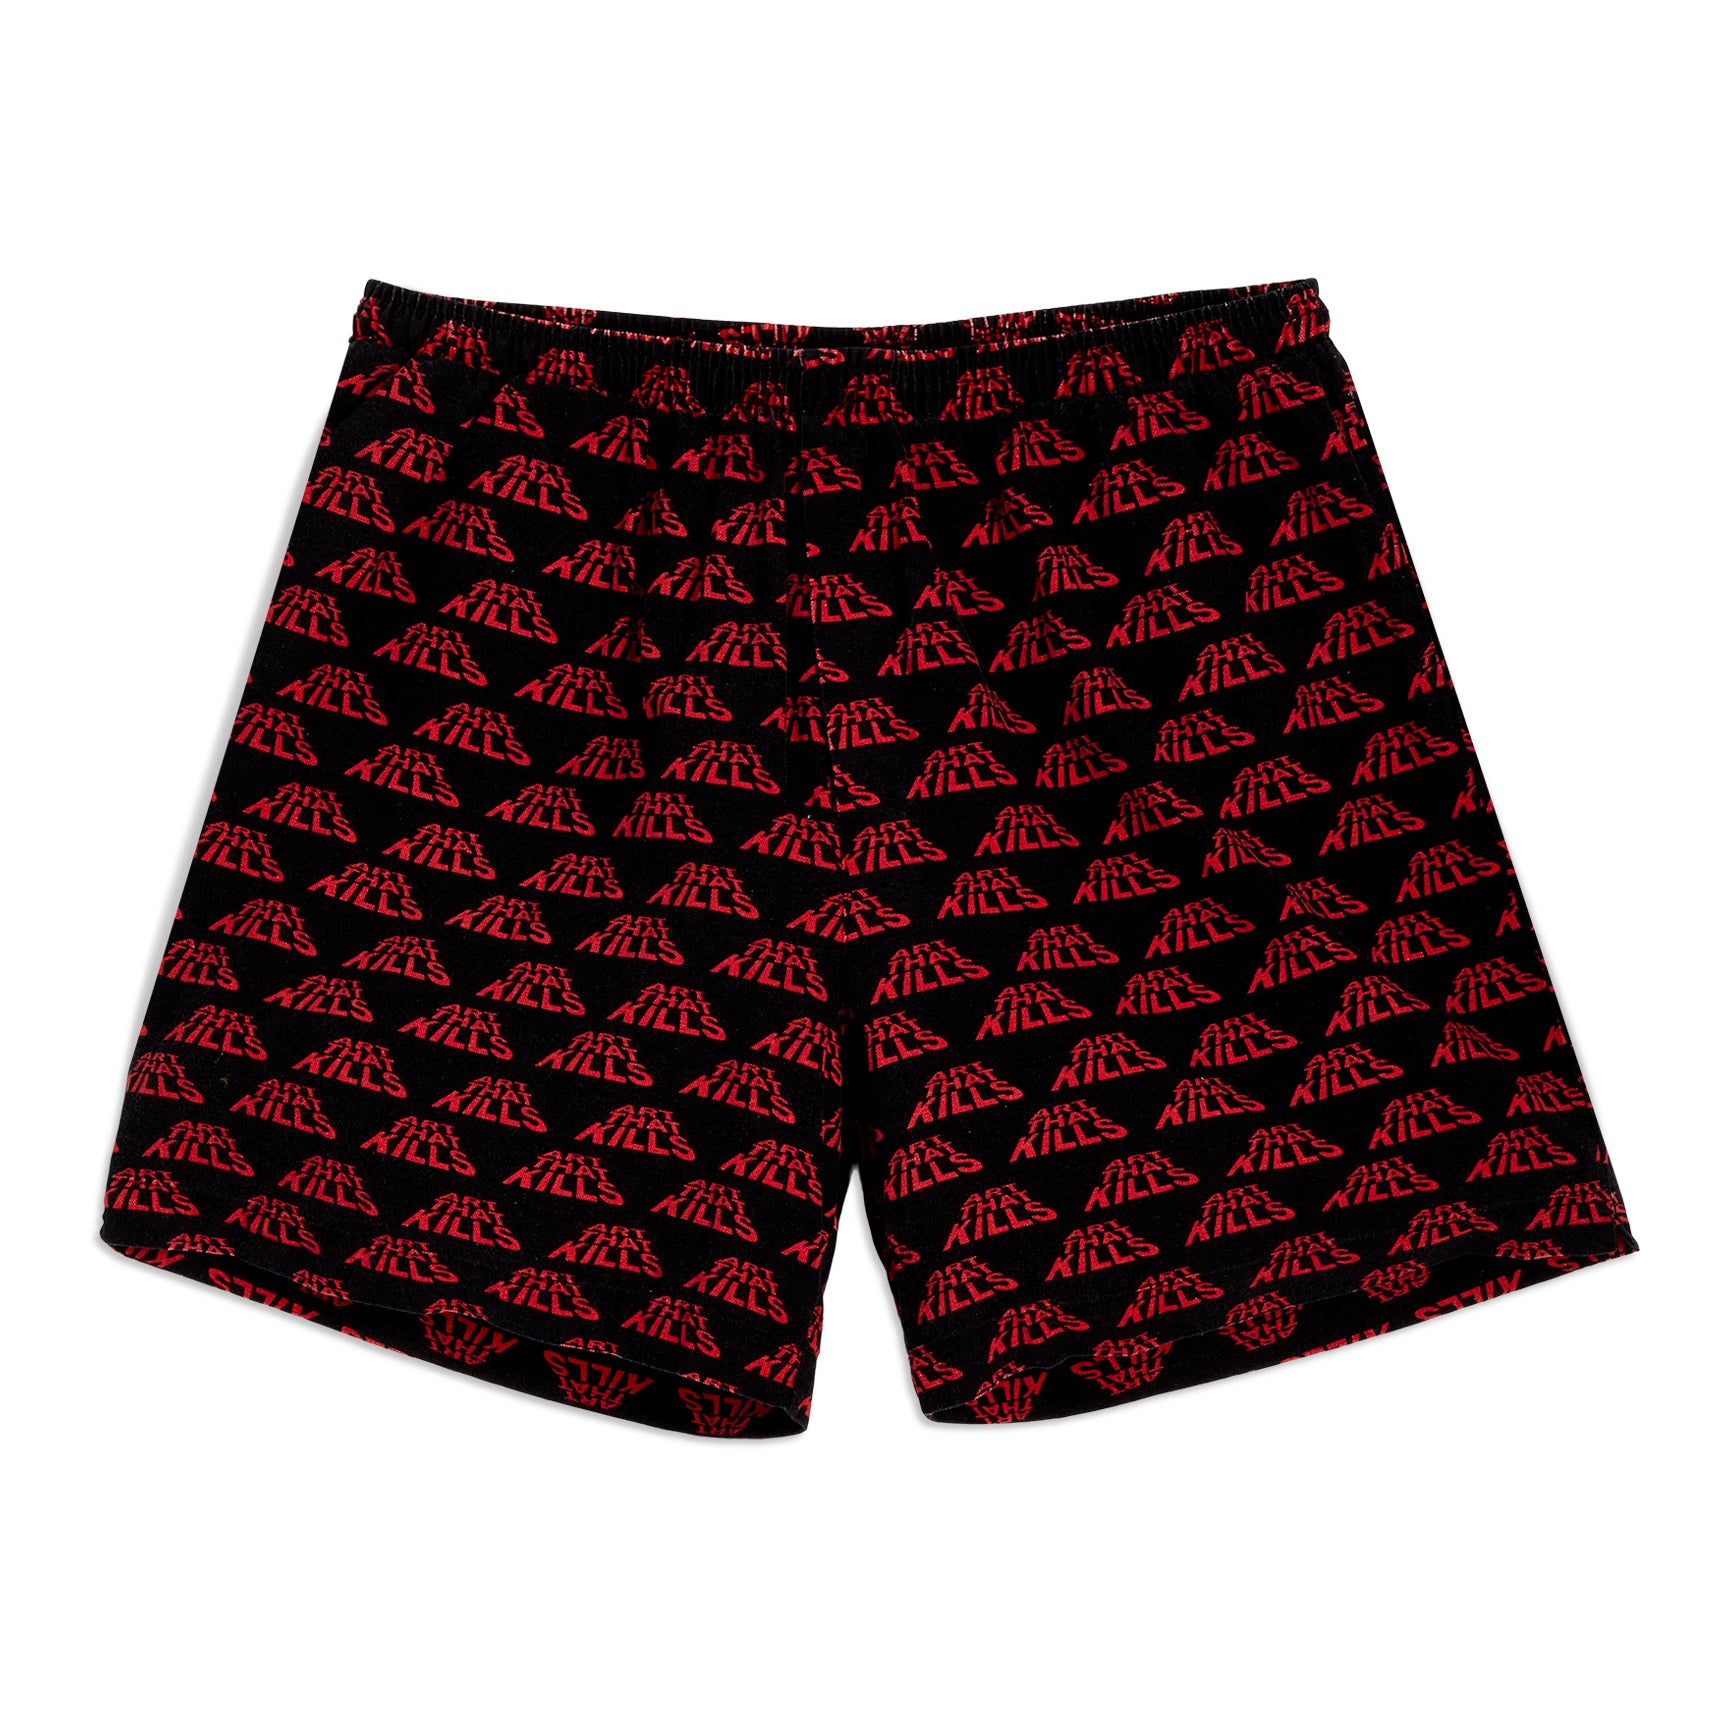 Gallery Dept AWESOME ATK SHORTS - GALLERY® Online Shop